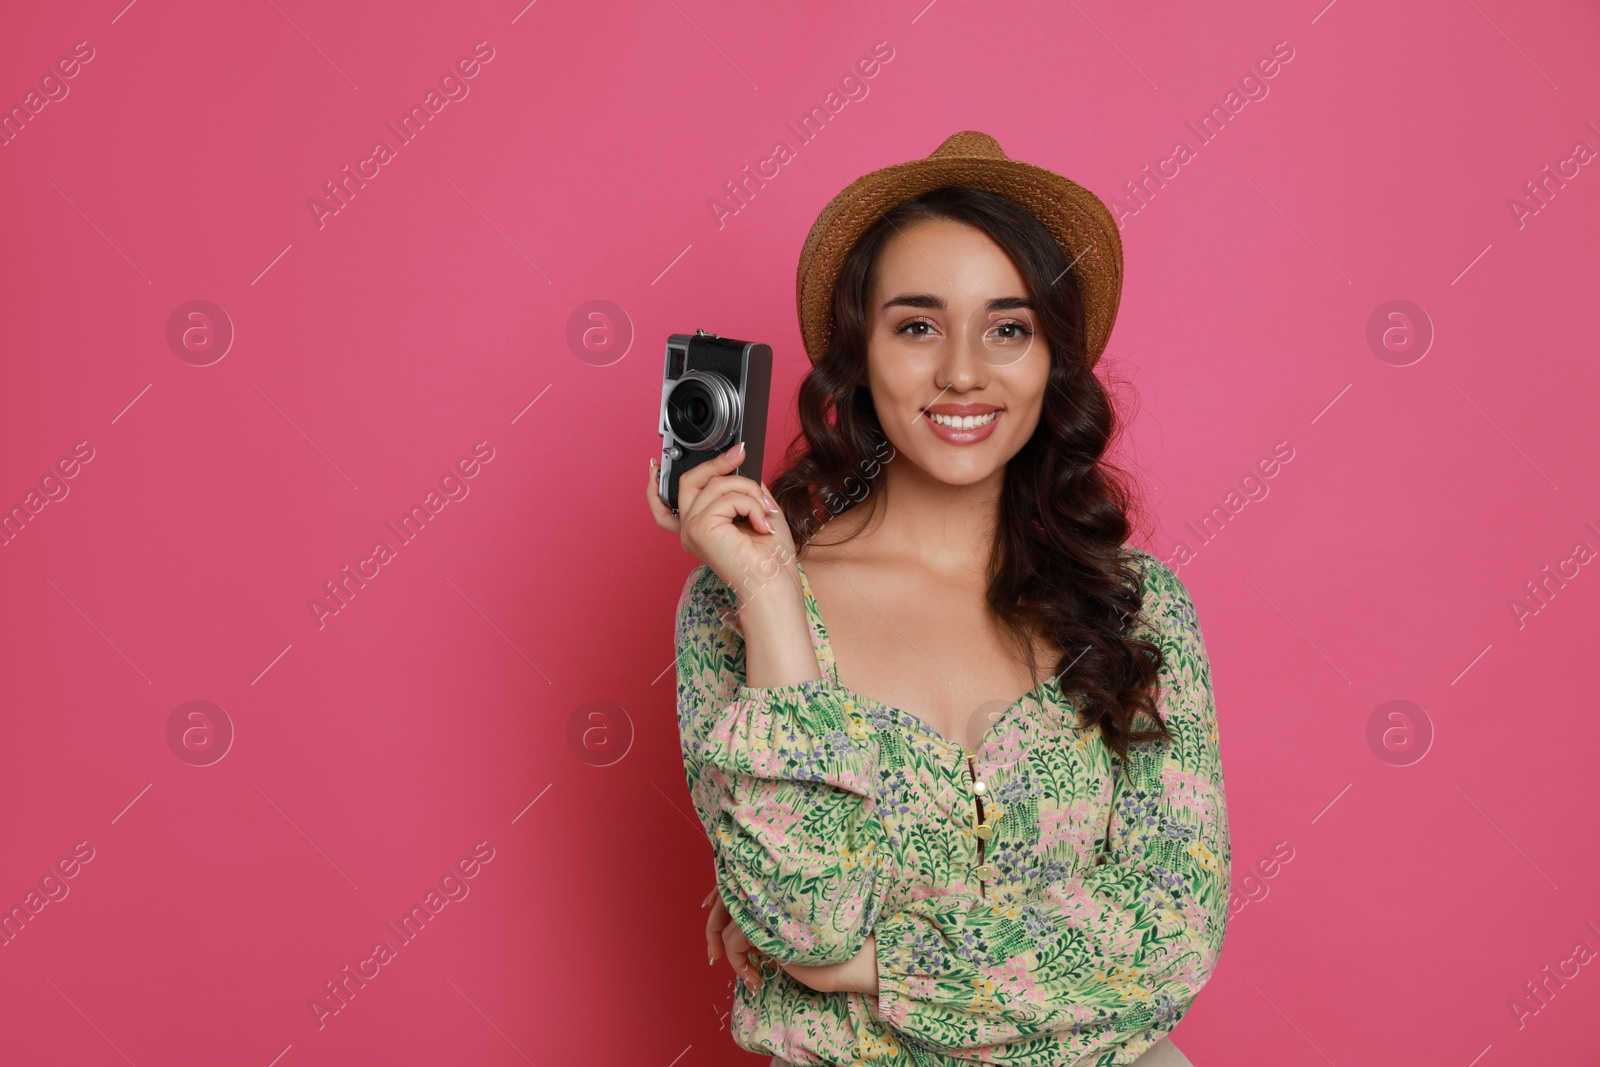 Photo of Beautiful young woman with straw hat and camera on pink background. Space for text